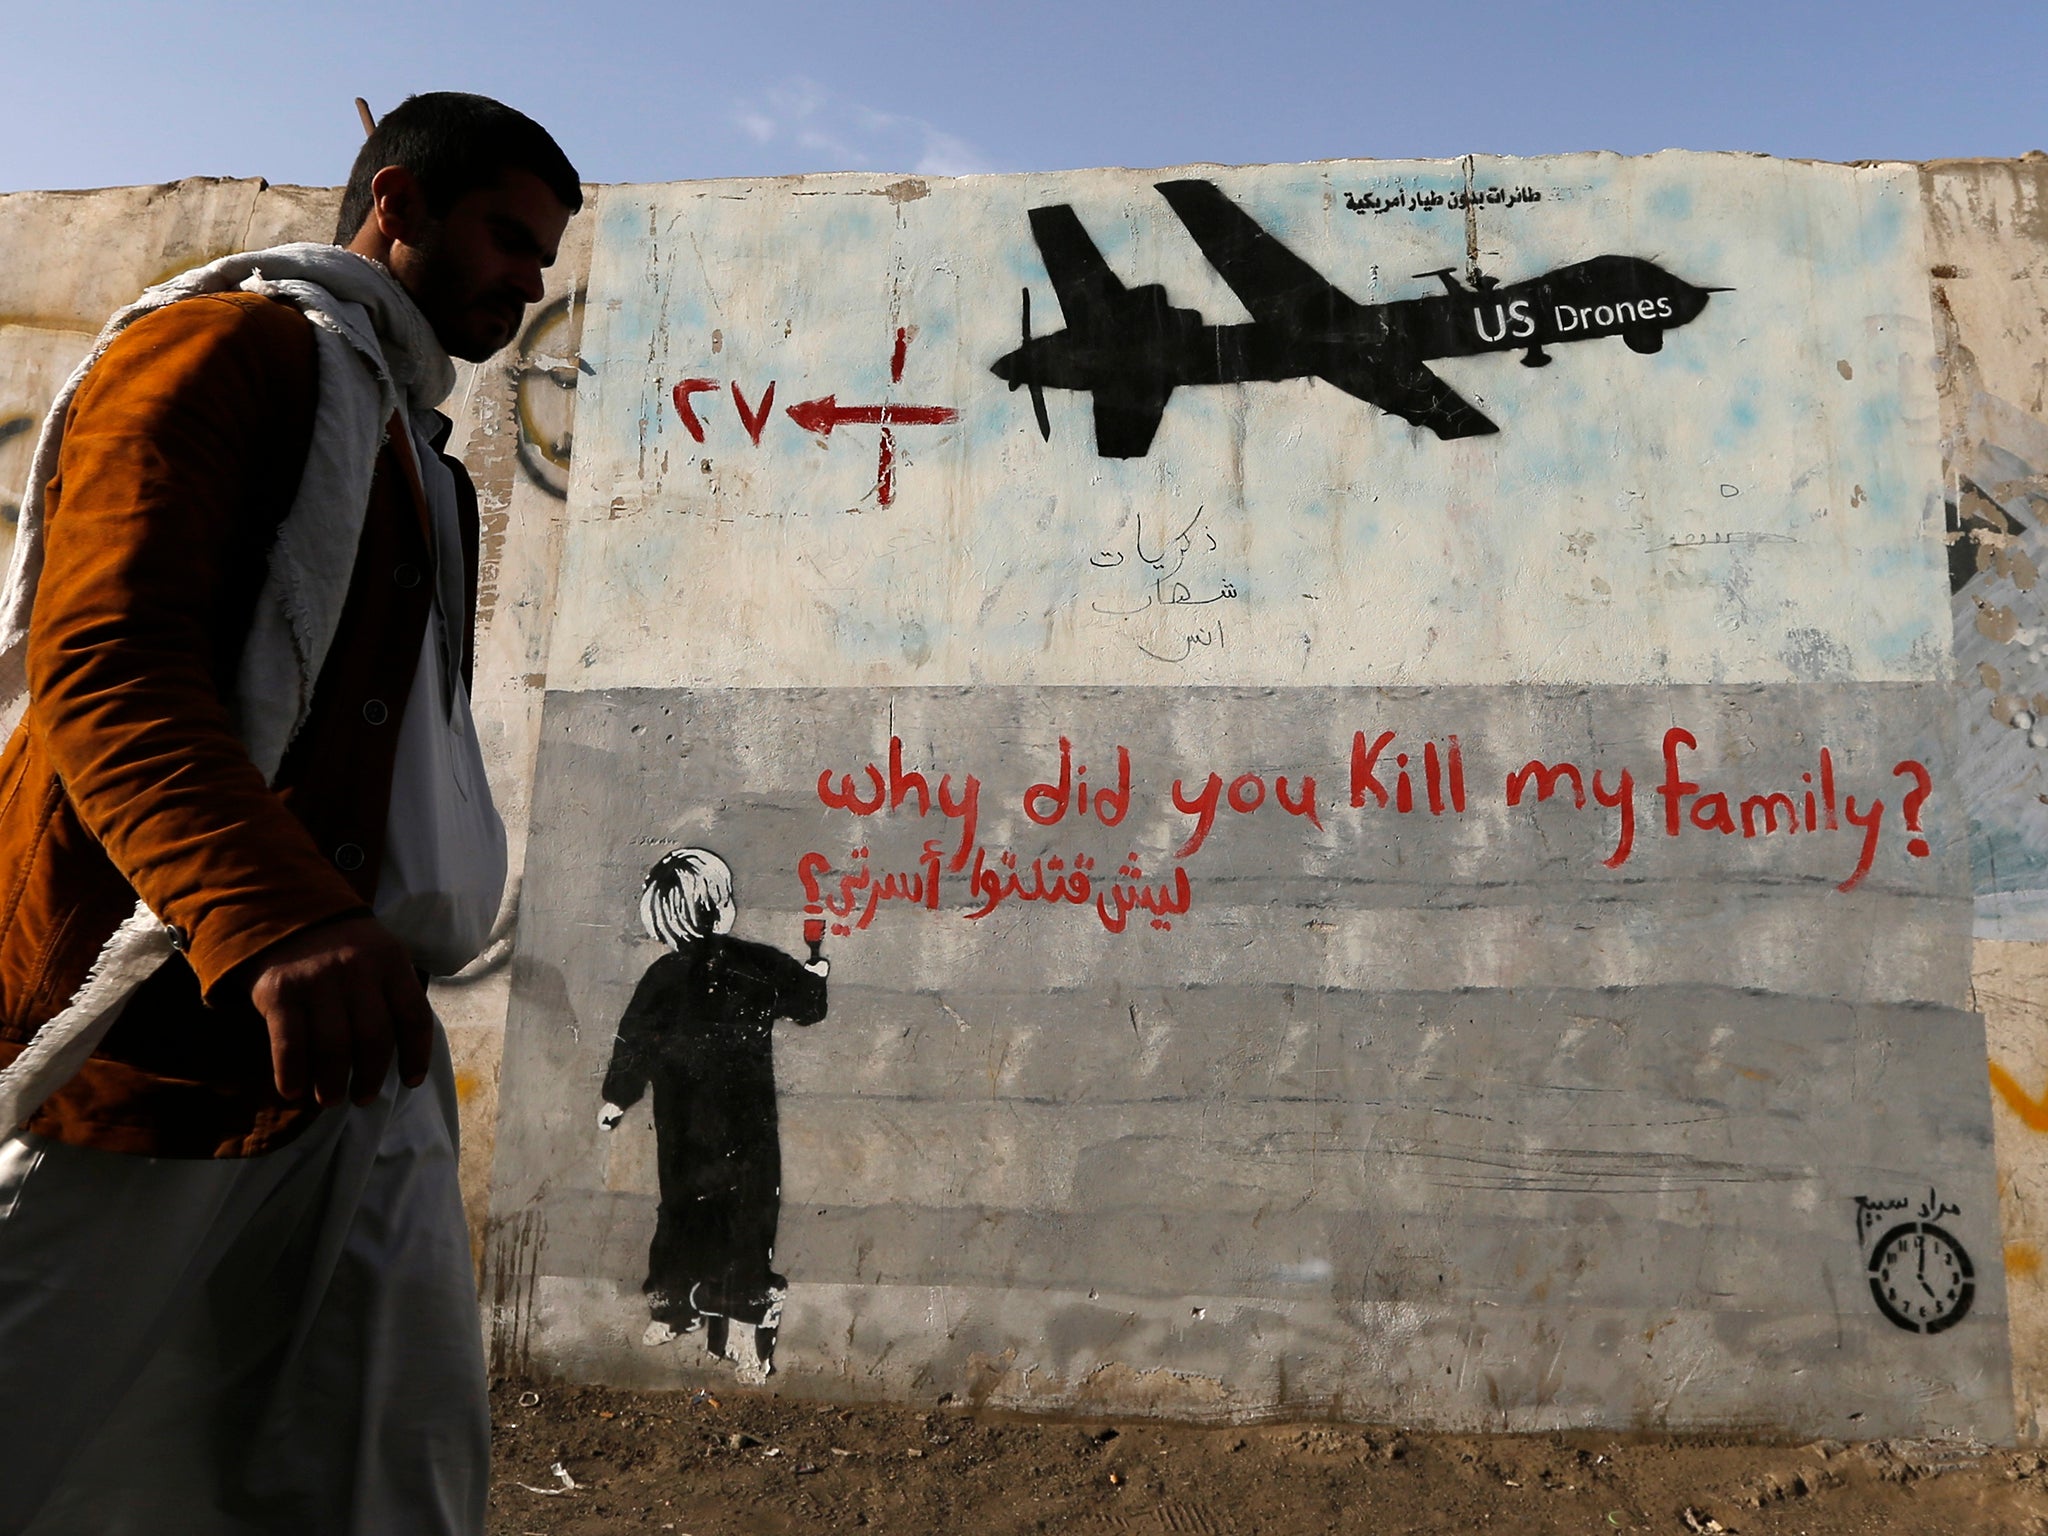 Graffiti denouncing strikes by US drones in Yemen, painted on a wall in Sanaa in 2014